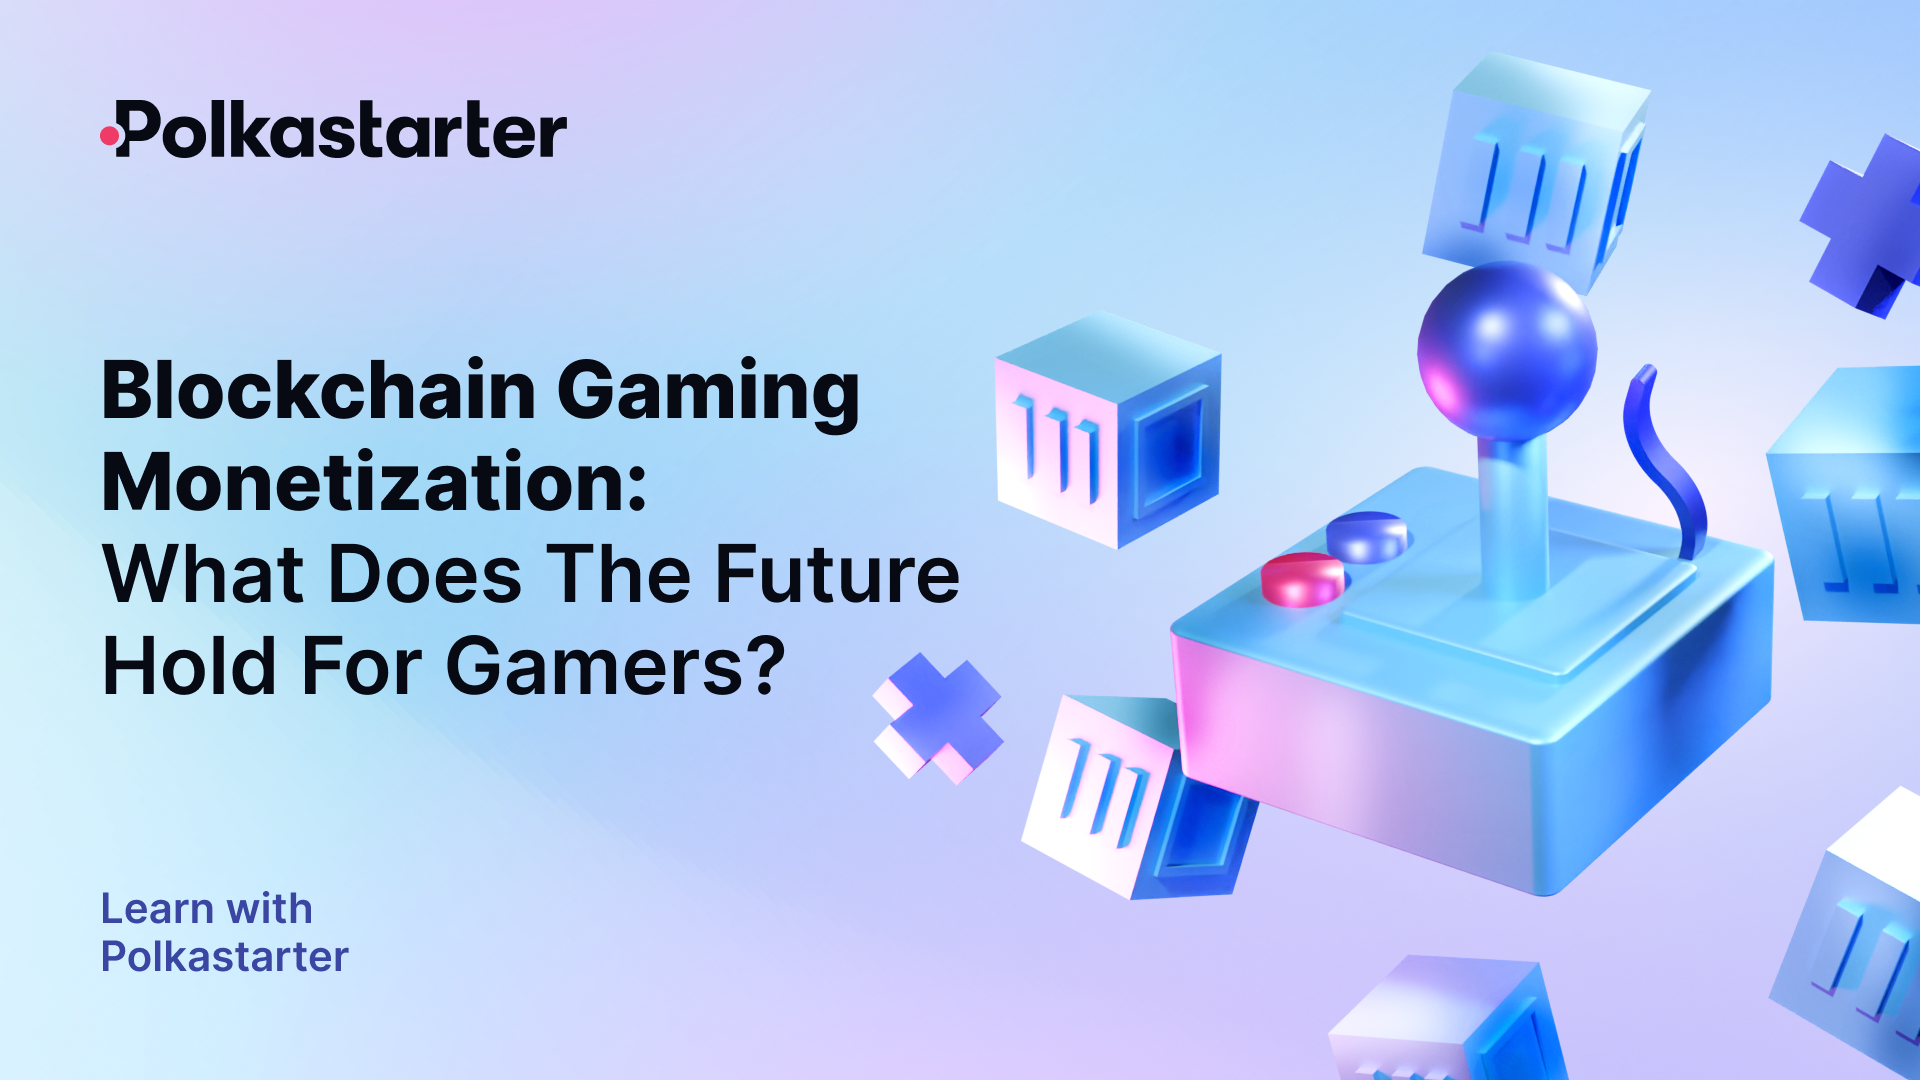 Blockchain Gaming Monetization: What Does The Future Hold For Gamers?